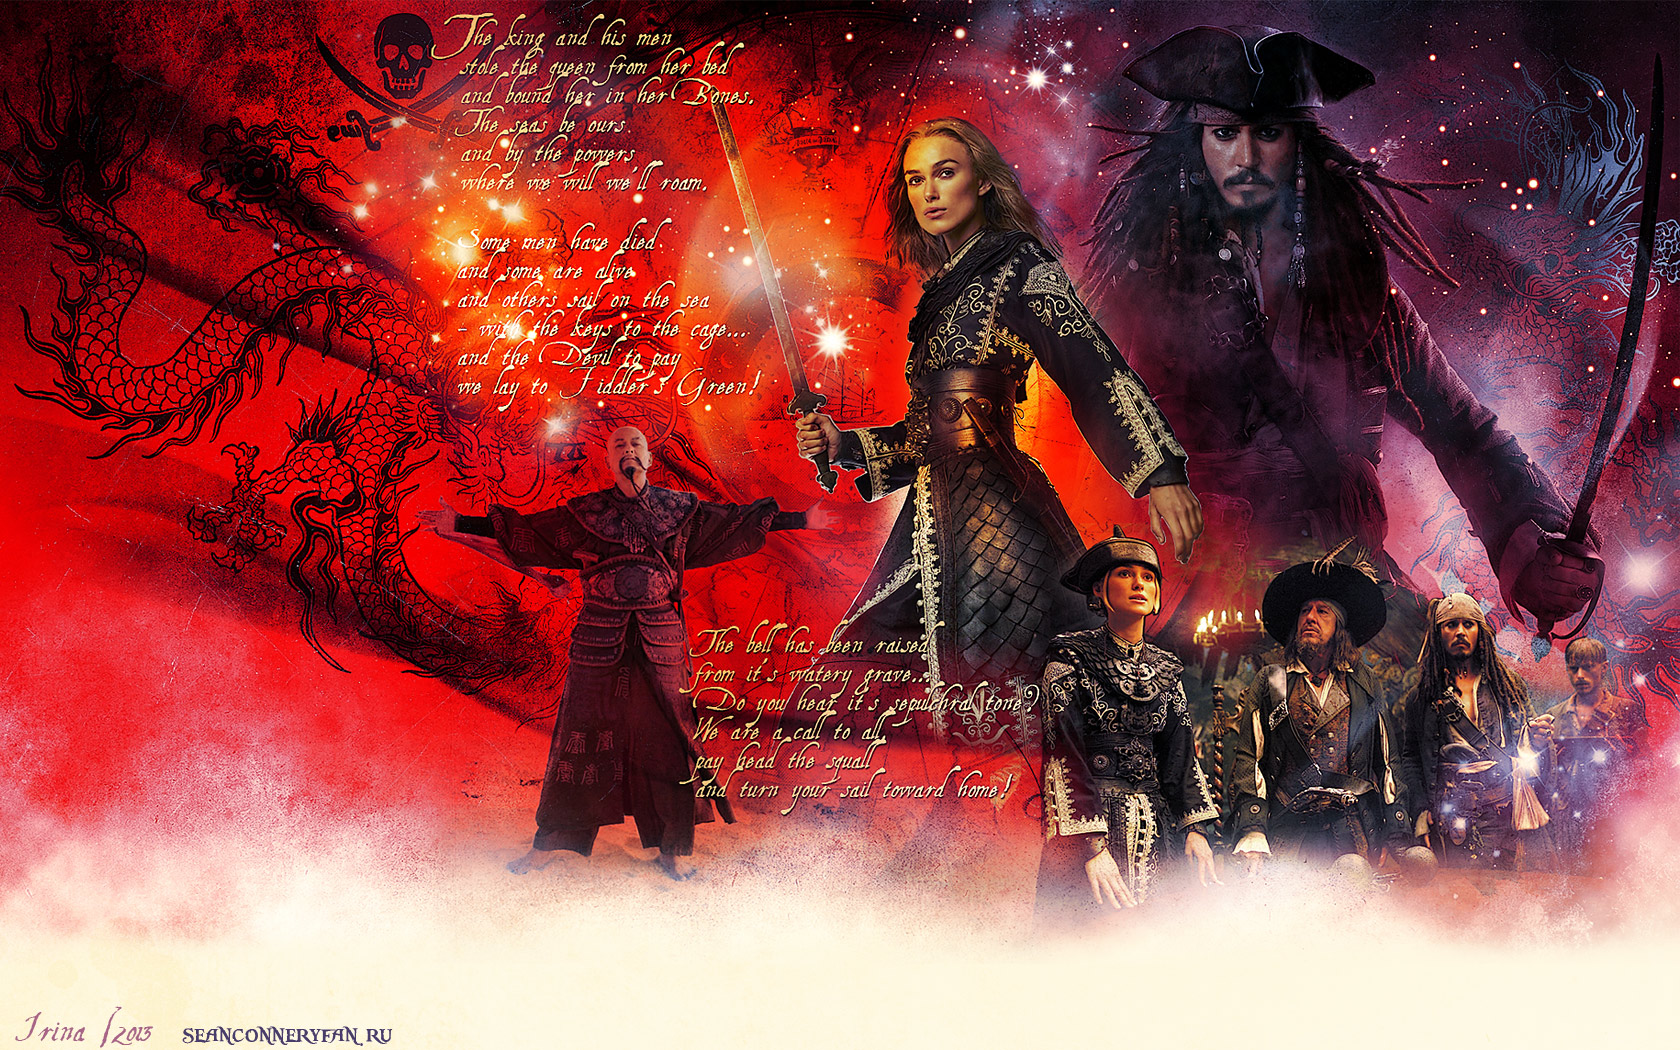   .     (Pirates of the Caribbean: At World's End),   ,  , Jack Sparrow, Hector Barbossa,   (Johnny Depp)  Wallpaper